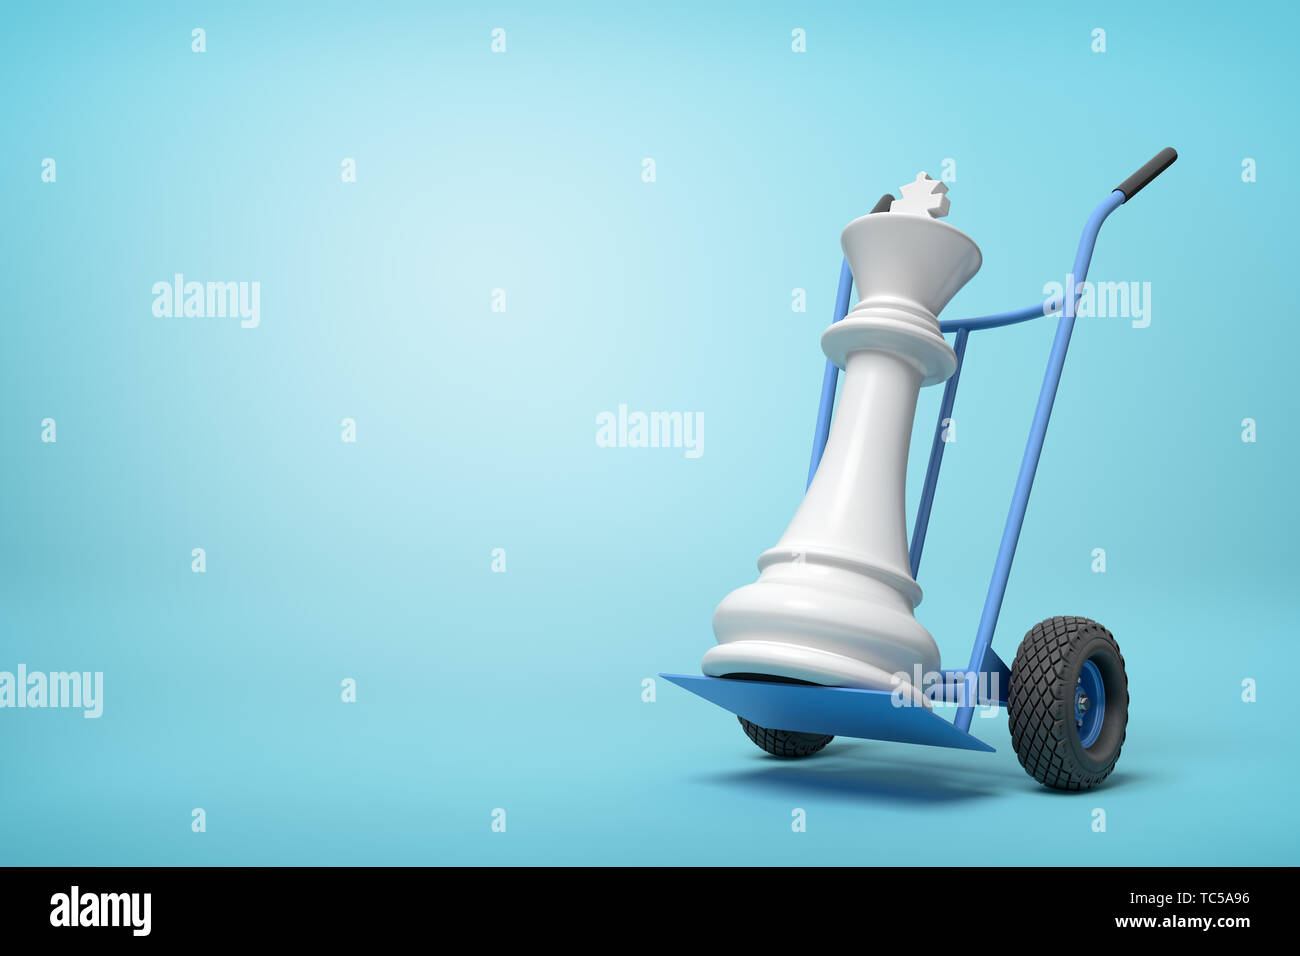 3d close-up rendering of white chess king on blue hand truck on light-blue background. Stock Photo